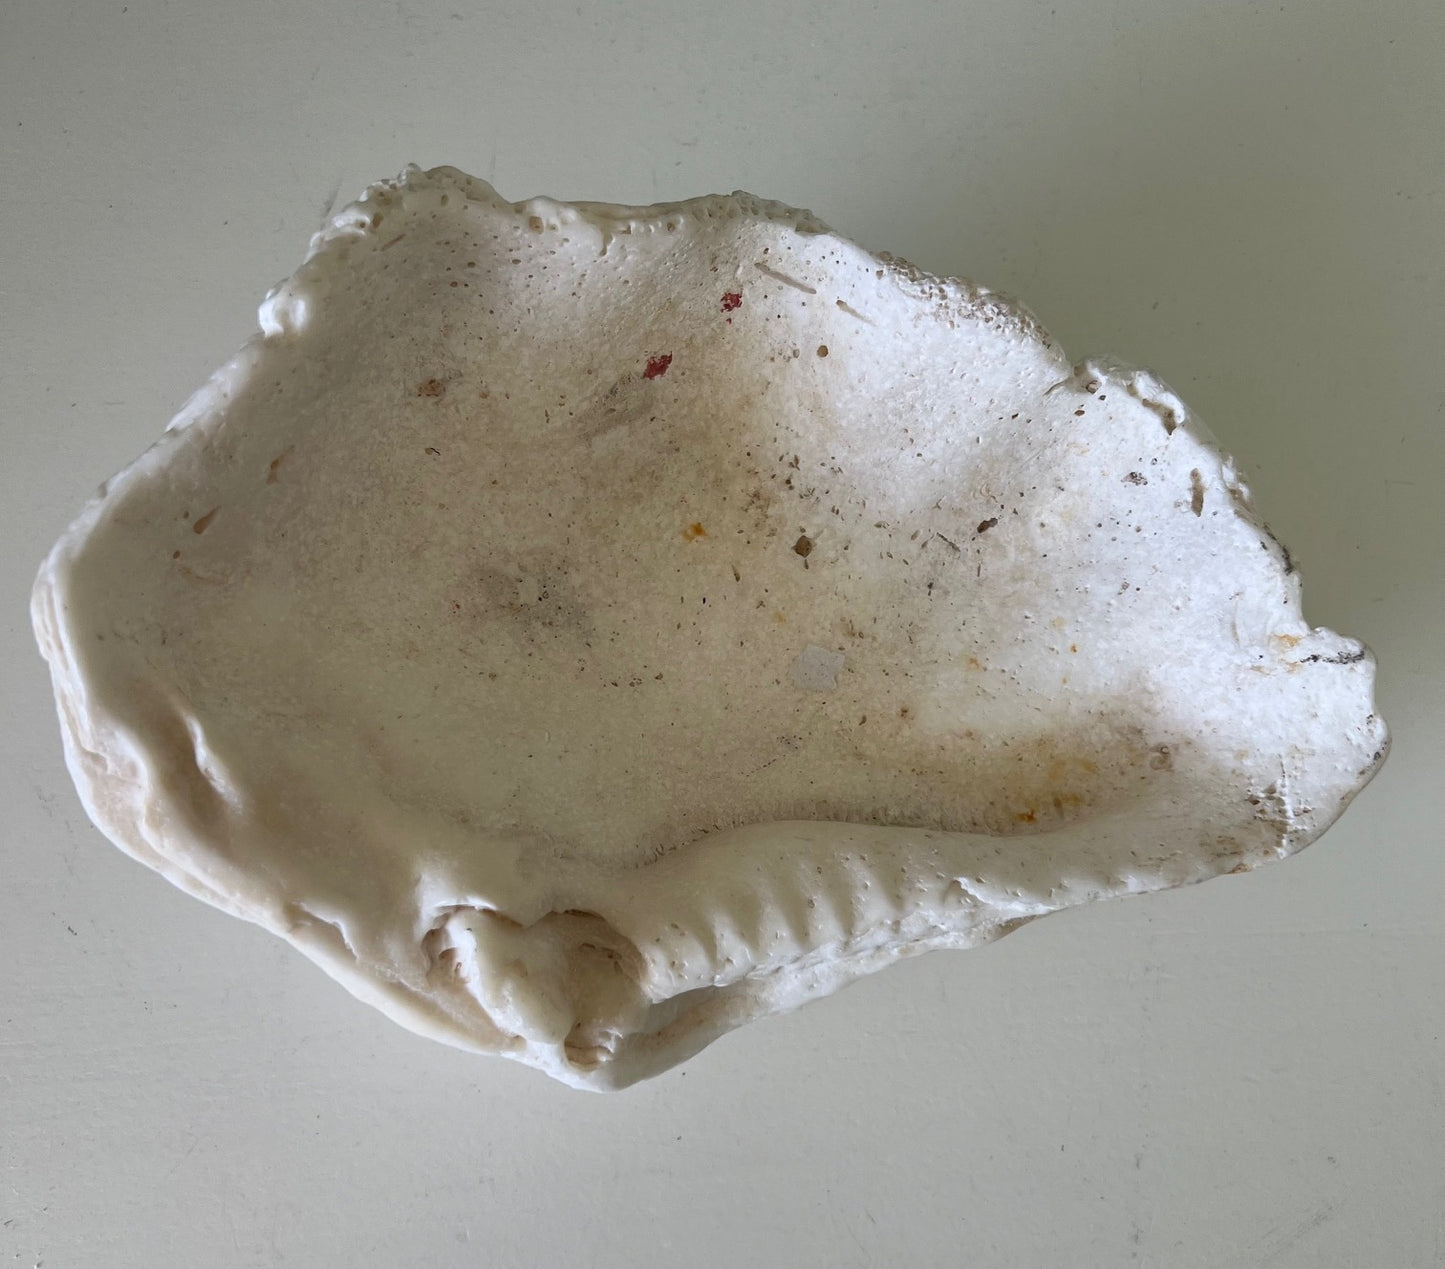 Large, white clam shell with a rough, natural texture inside and out. The aged beauty is evident throughout the shell